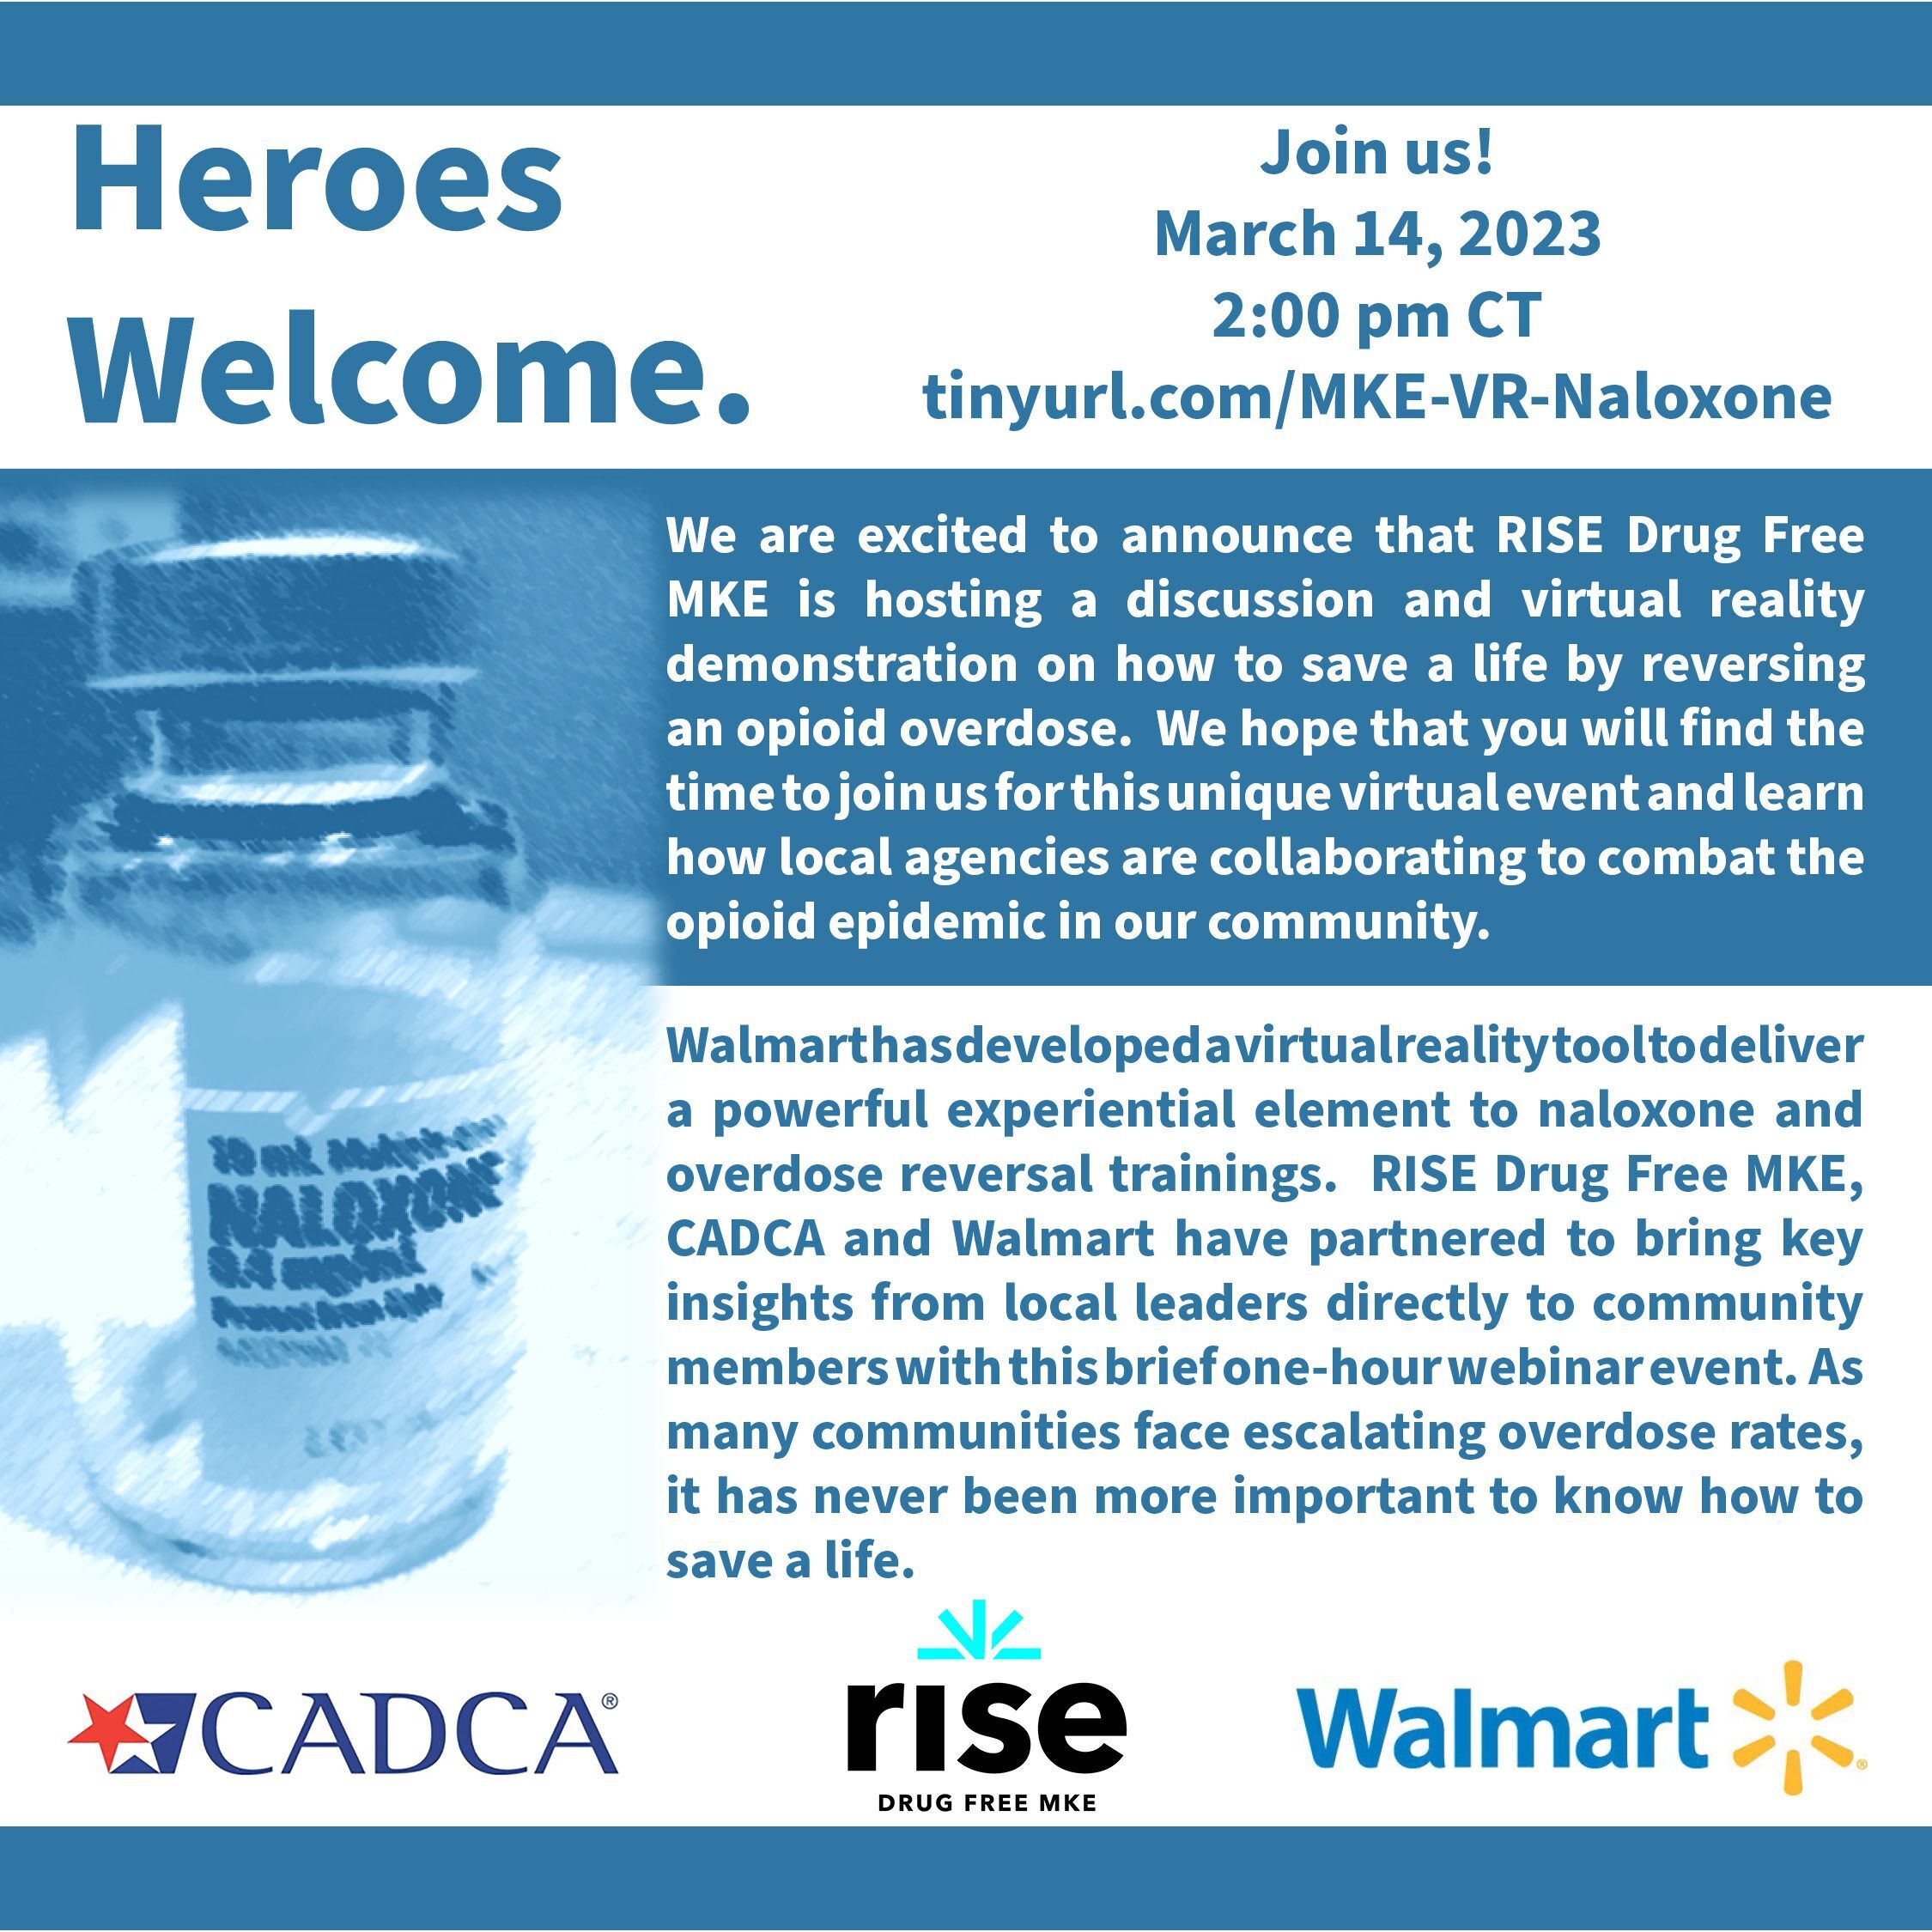 RISE Drug Free MKE Hosts Opioid Overdose Reversal Virtual Reality Demonstration March 14